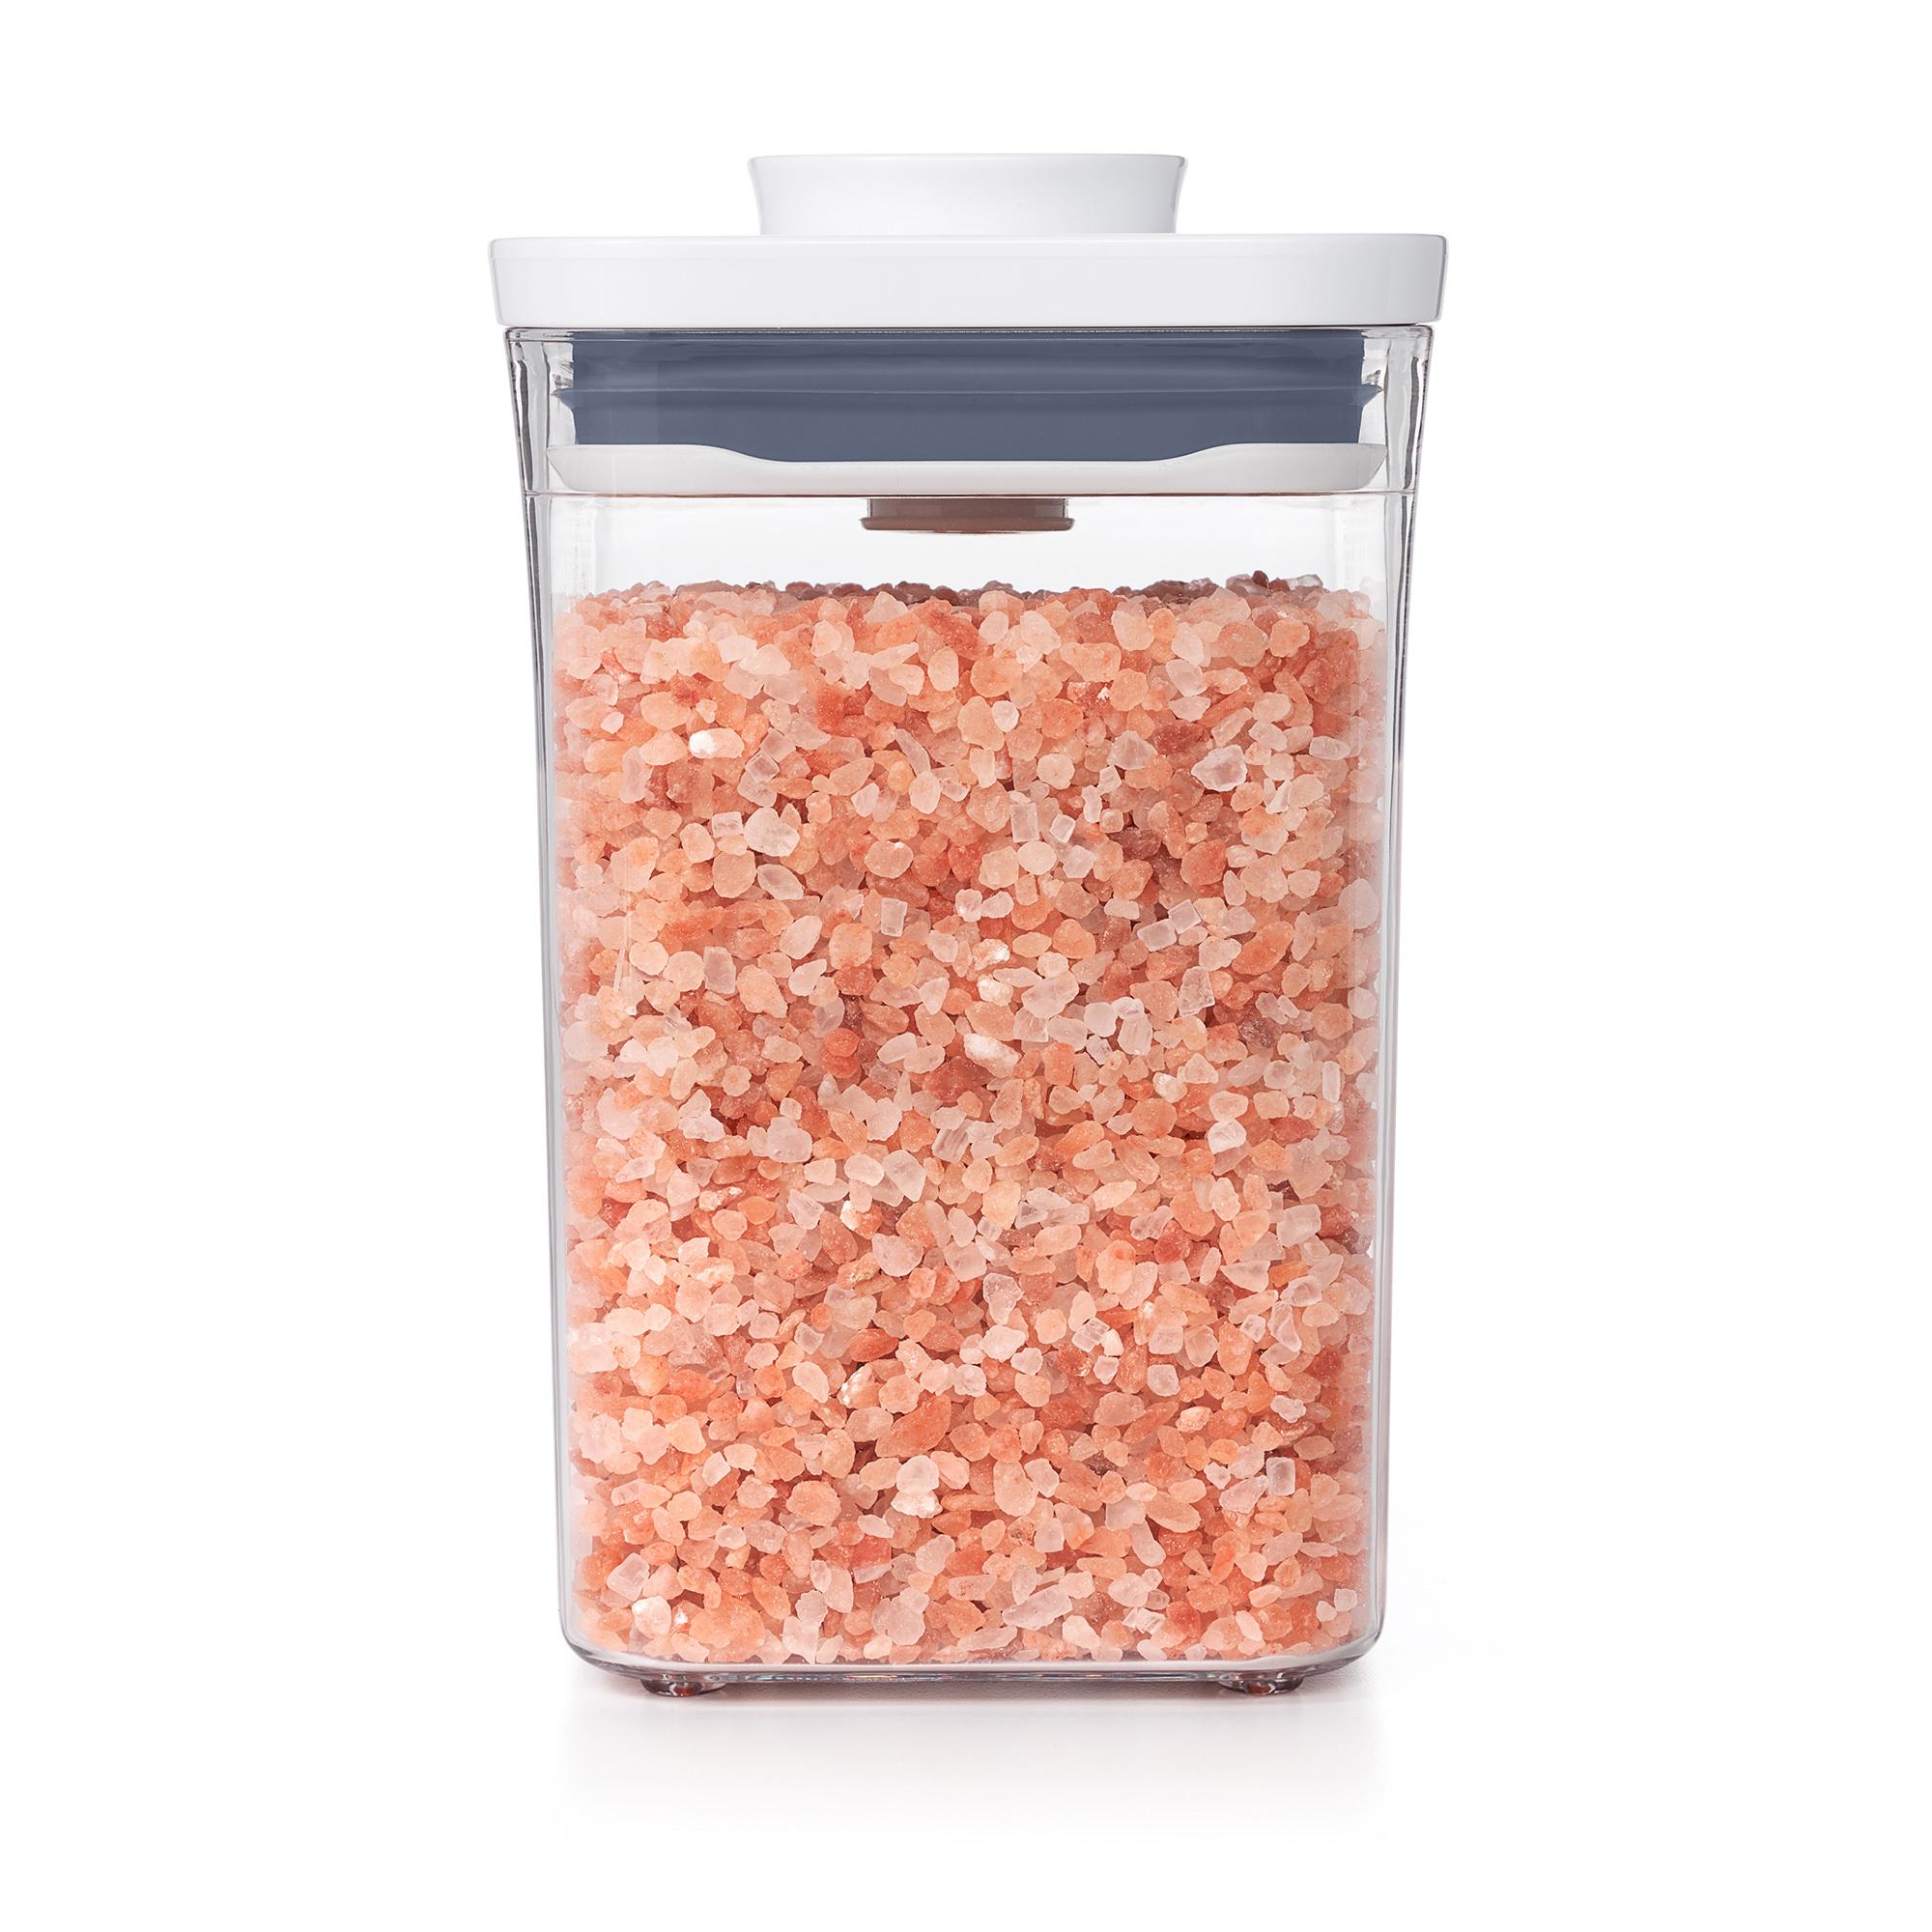 OXO Good Grips Square Pop 2.0 Container 1L Image 4